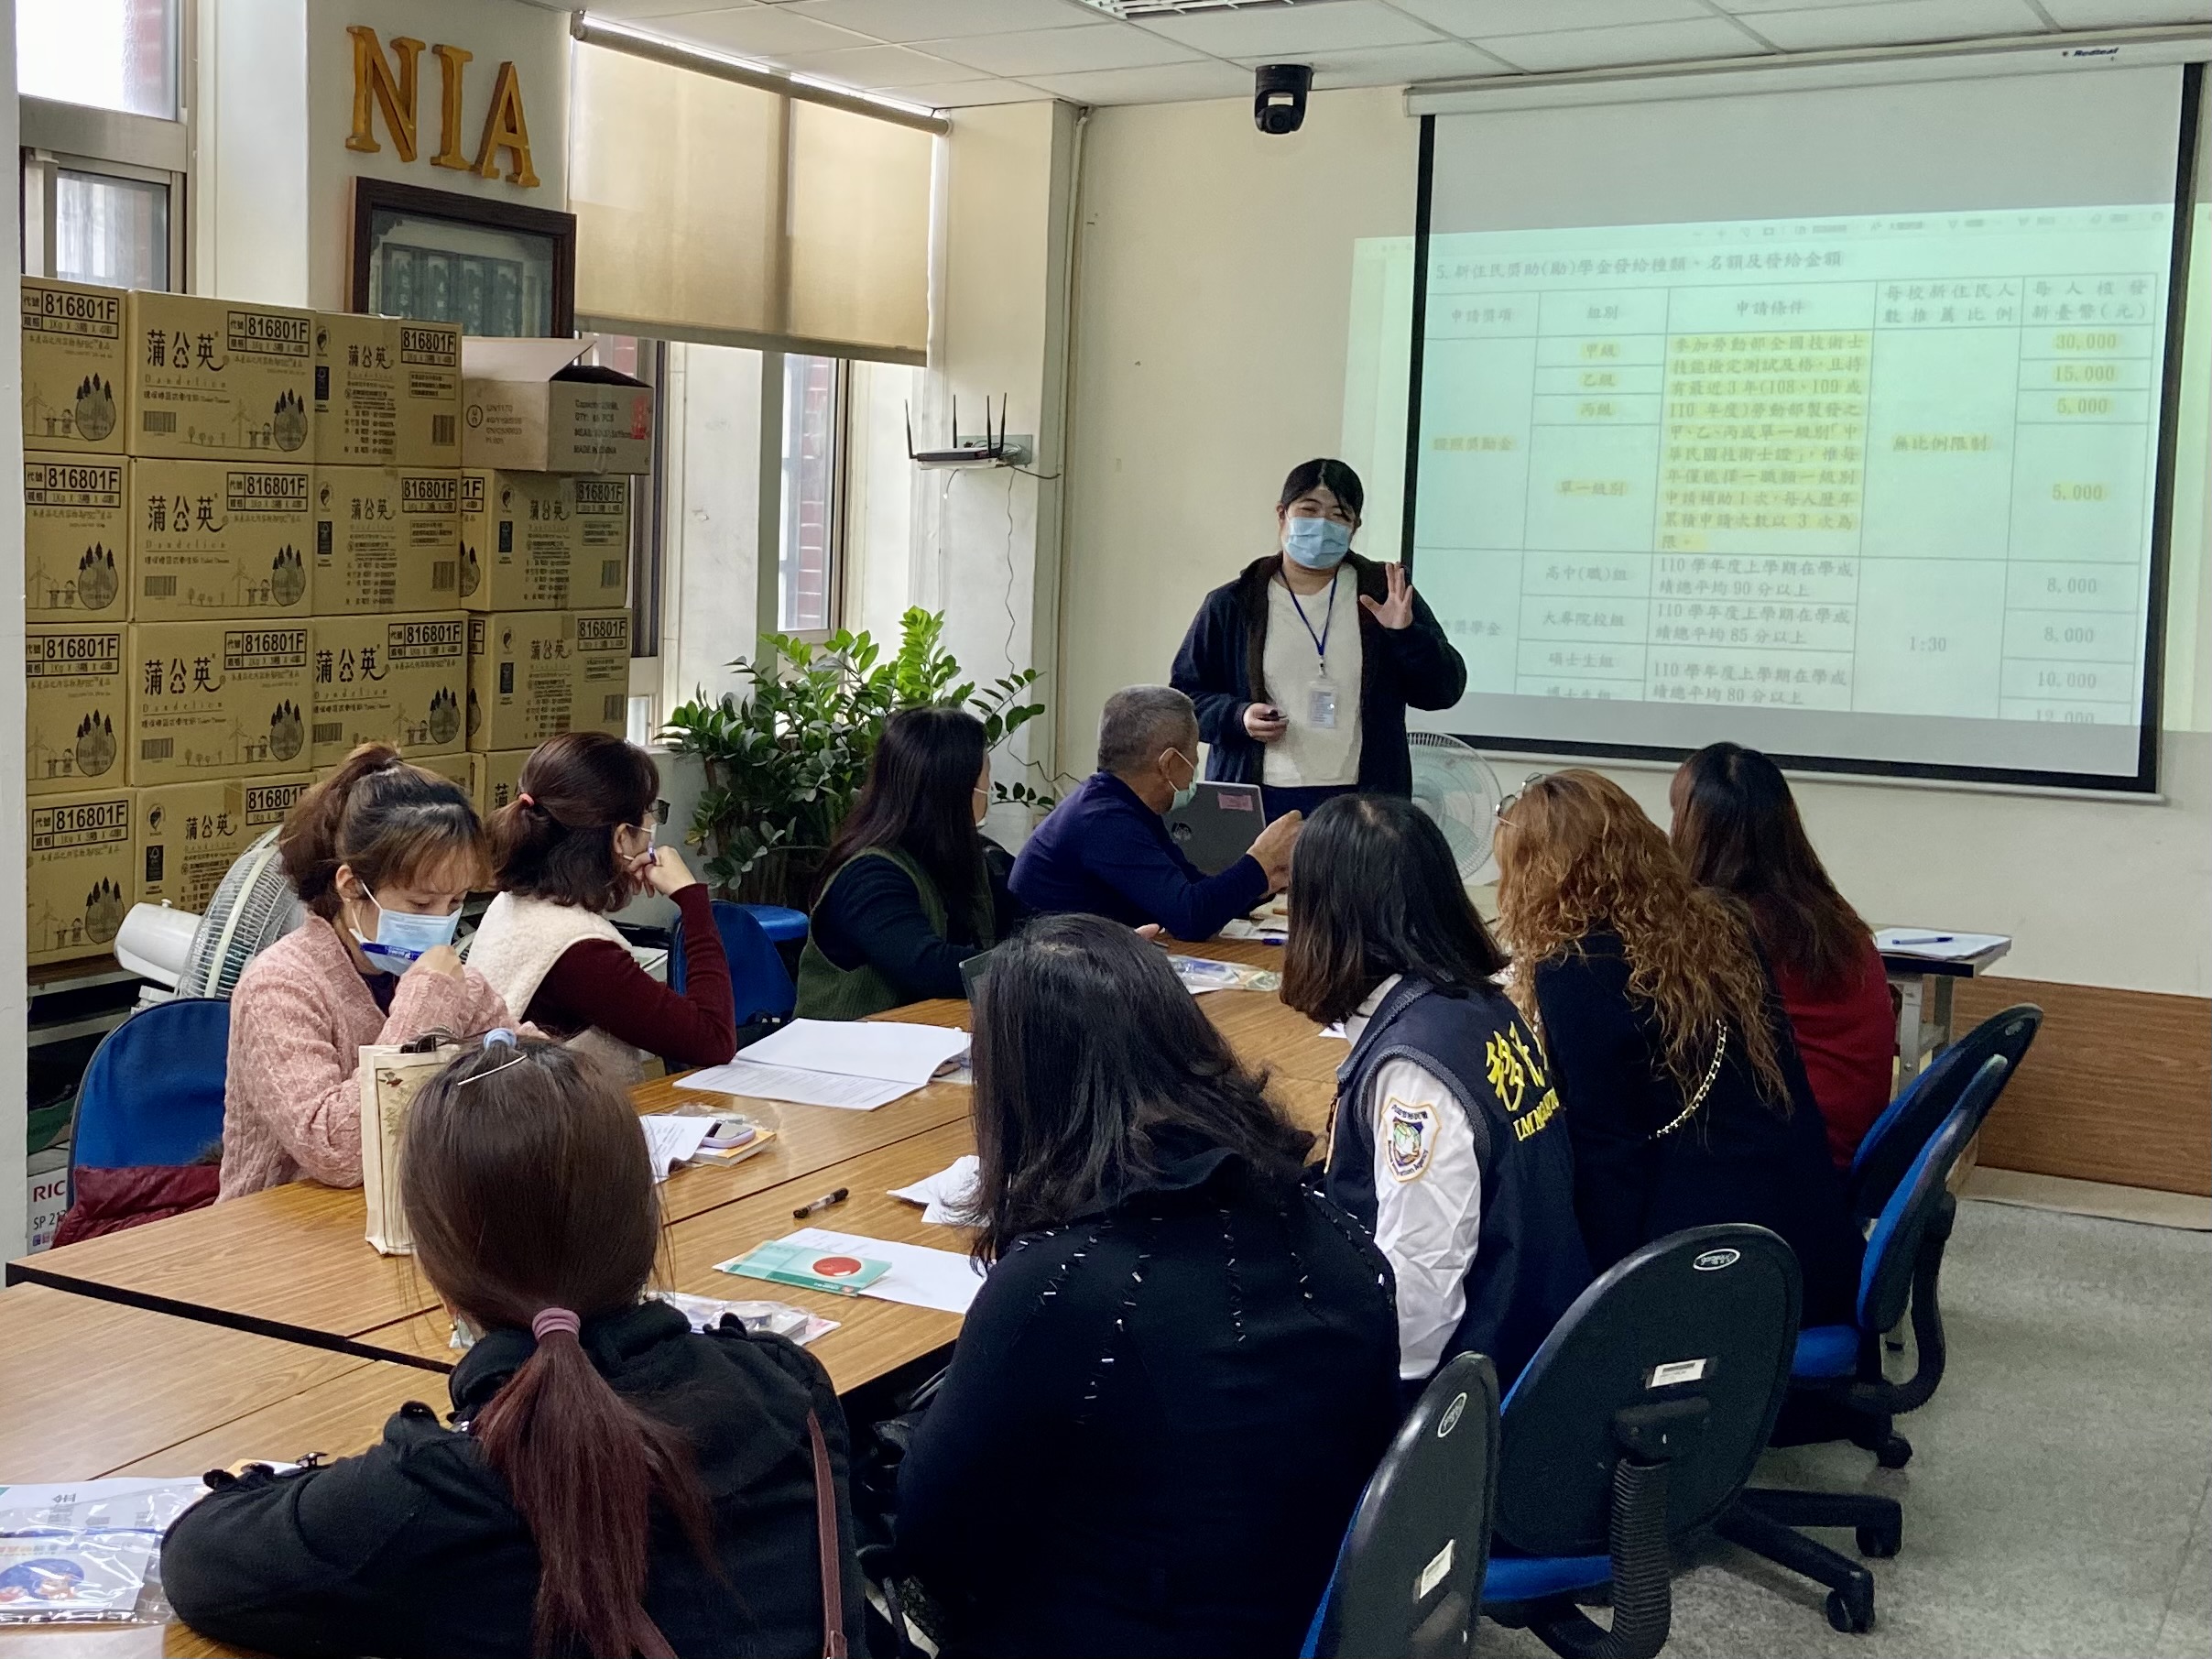 NIA sent a lecturer to introduce the Scholarship Program in detail. (Photo / Provided by the Nantou County Service Center)